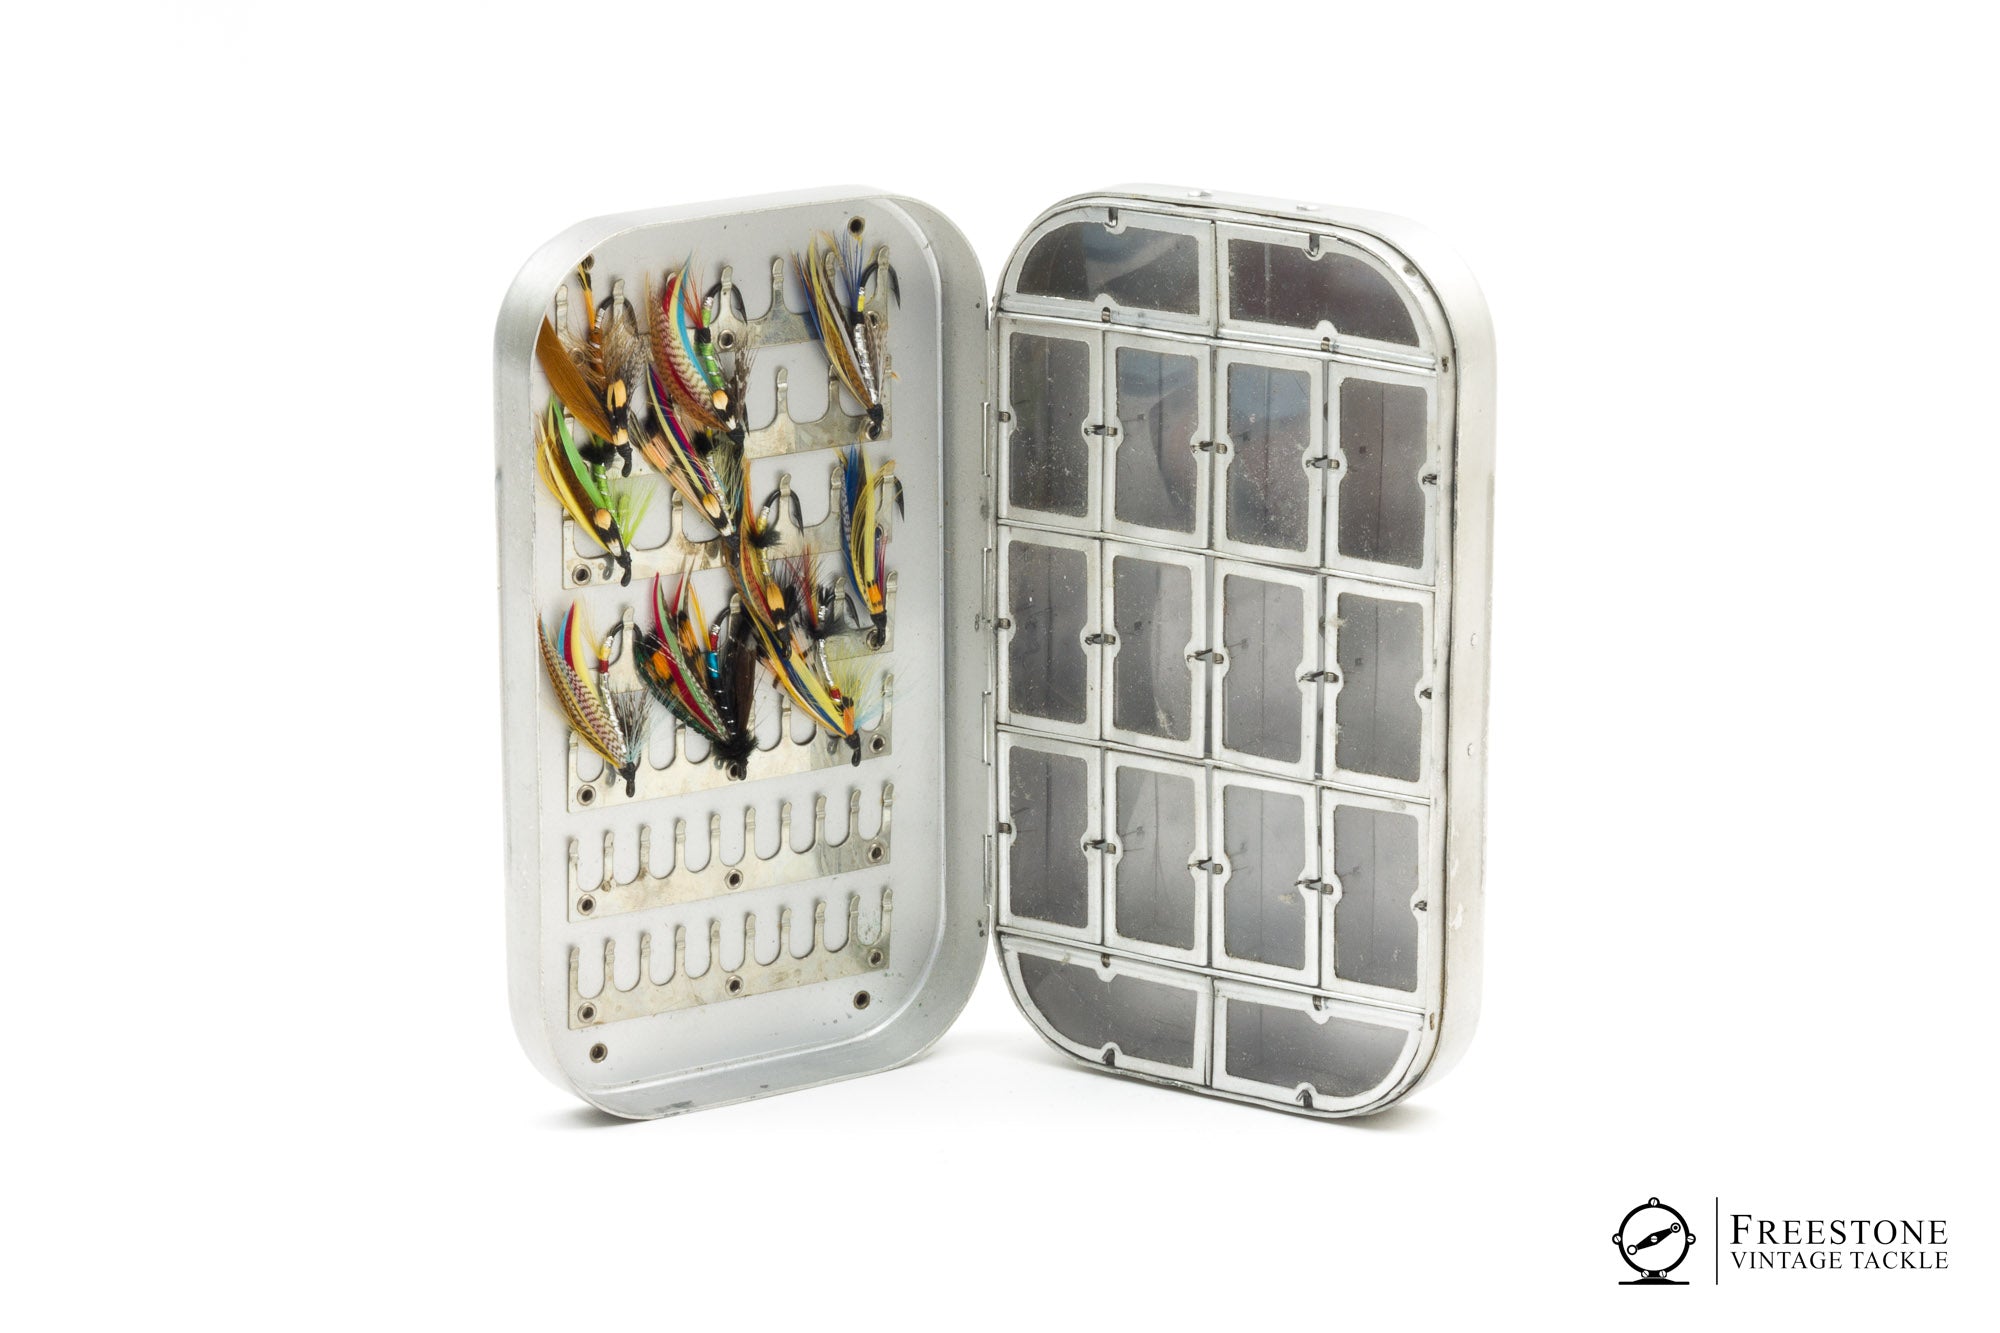 Wheatley - Clips / Compartments Fly Box